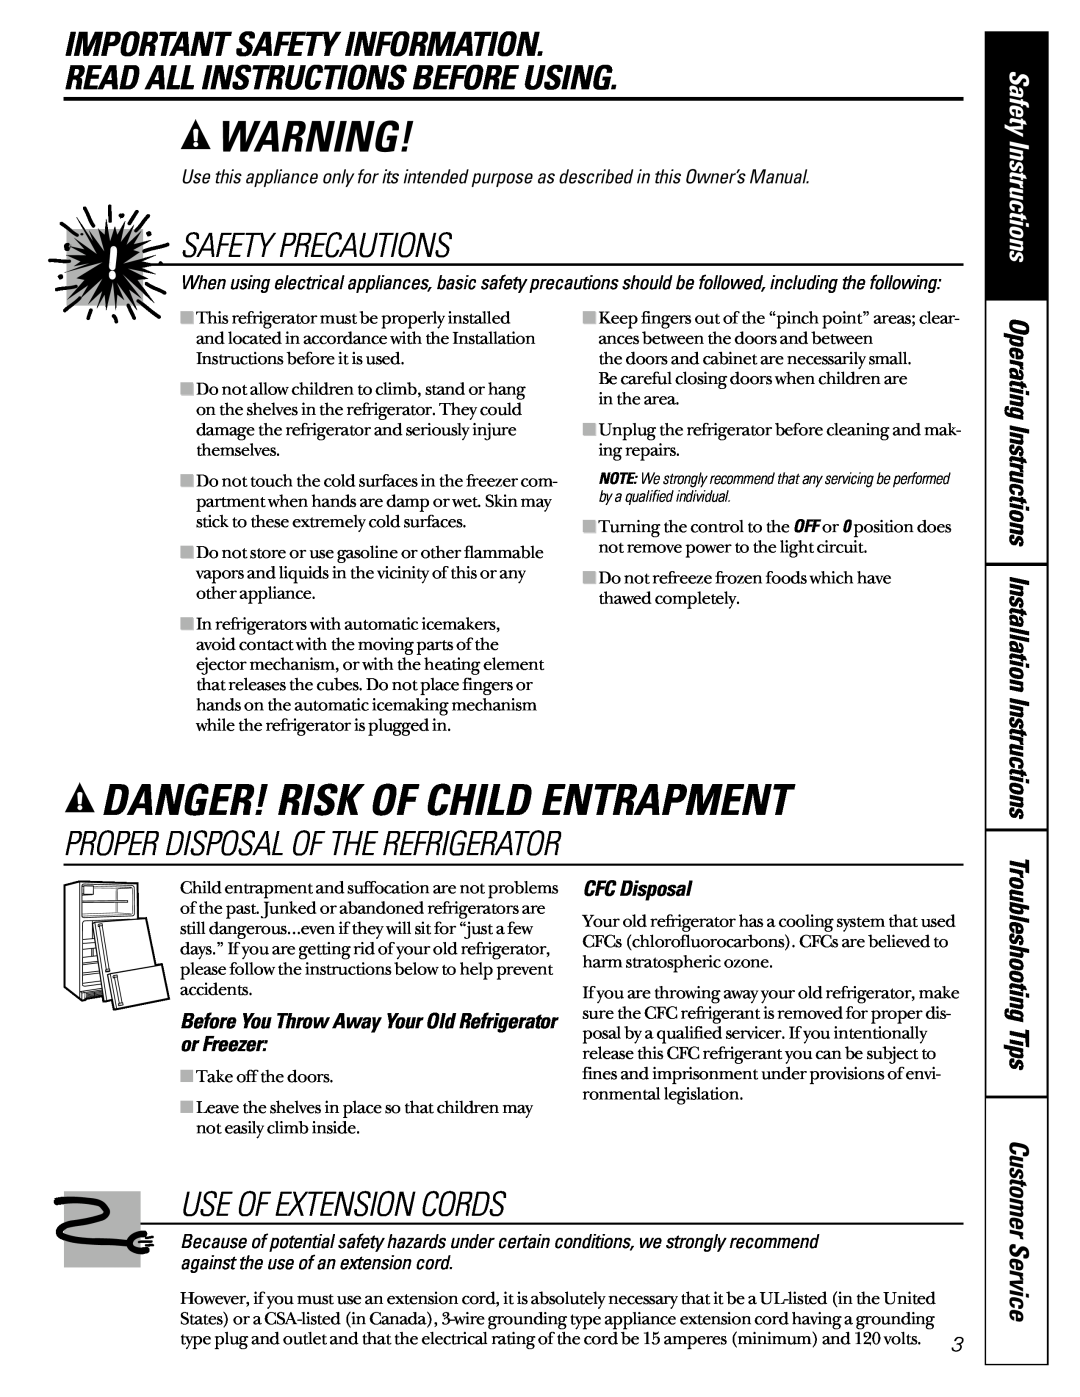 GE 22-27 Danger! Risk Of Child Entrapment, Important Safety Information, Read All Instructions Before Using, CFC Disposal 